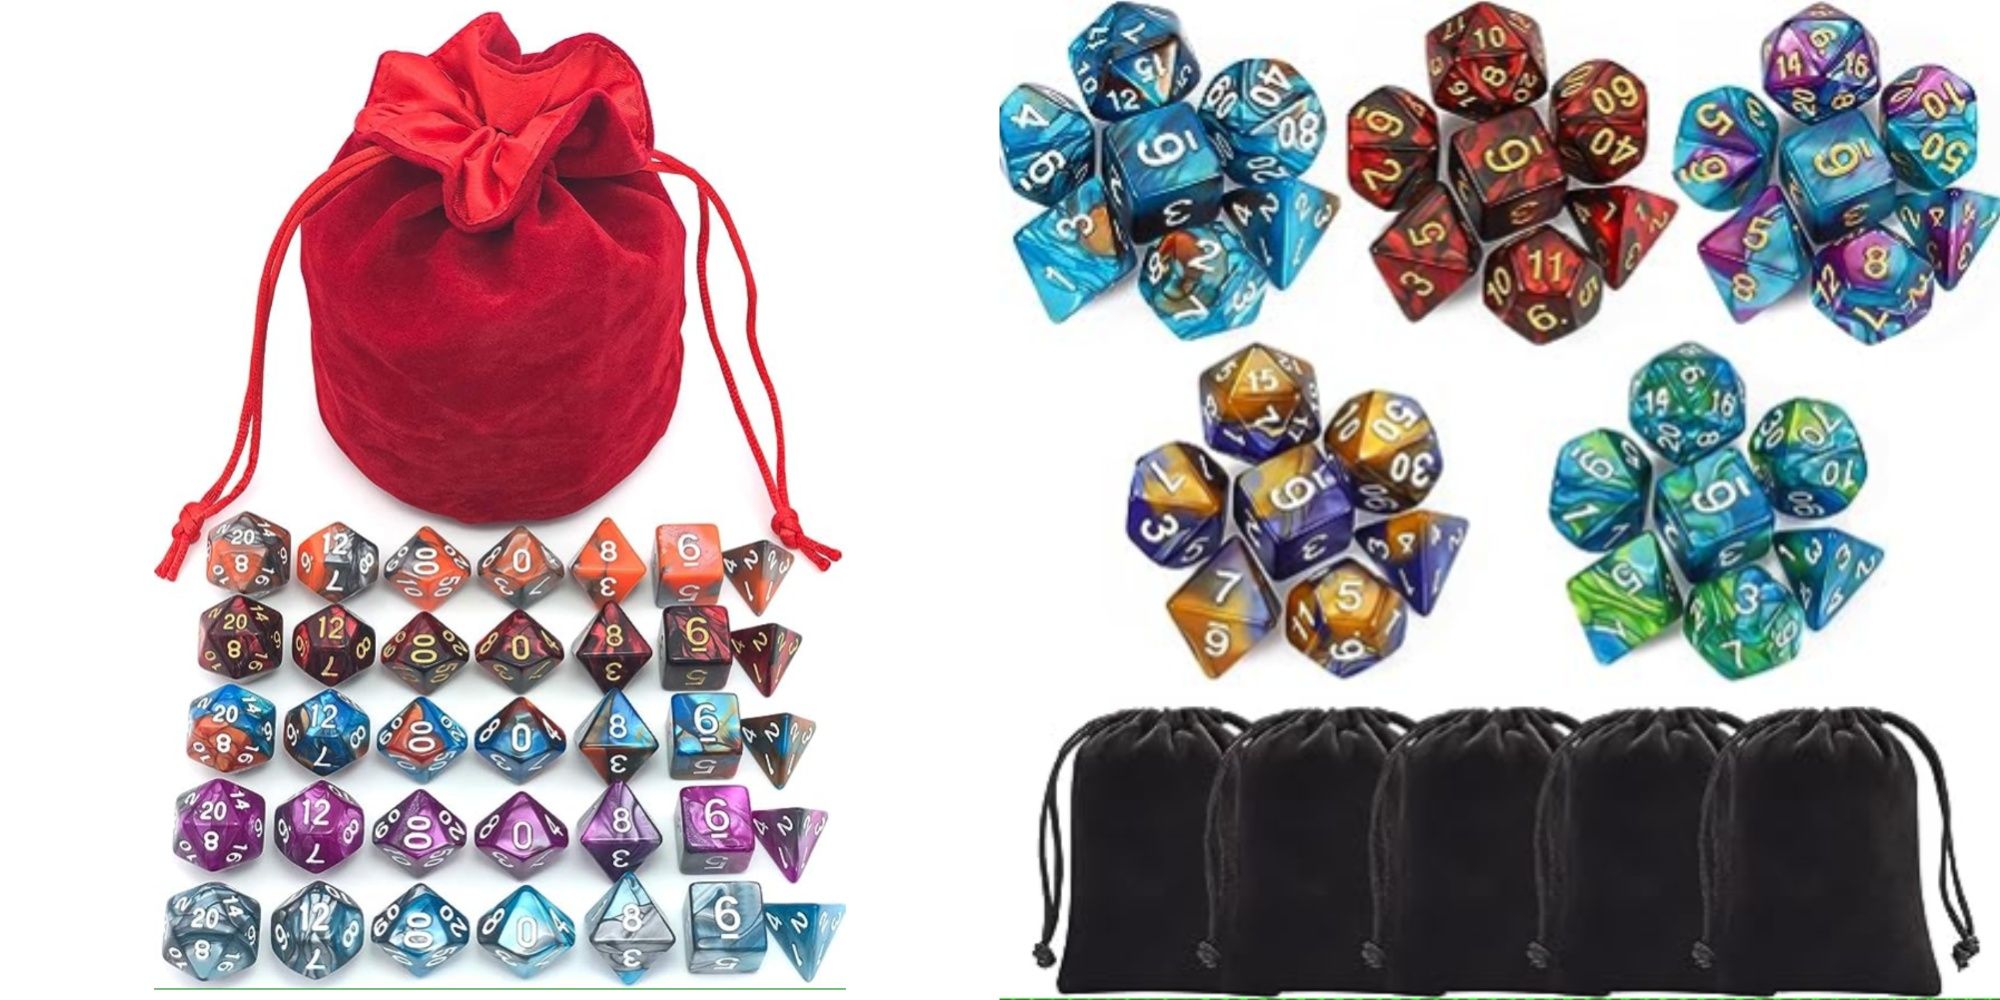 Dnd dice sets and dice bags side by side 